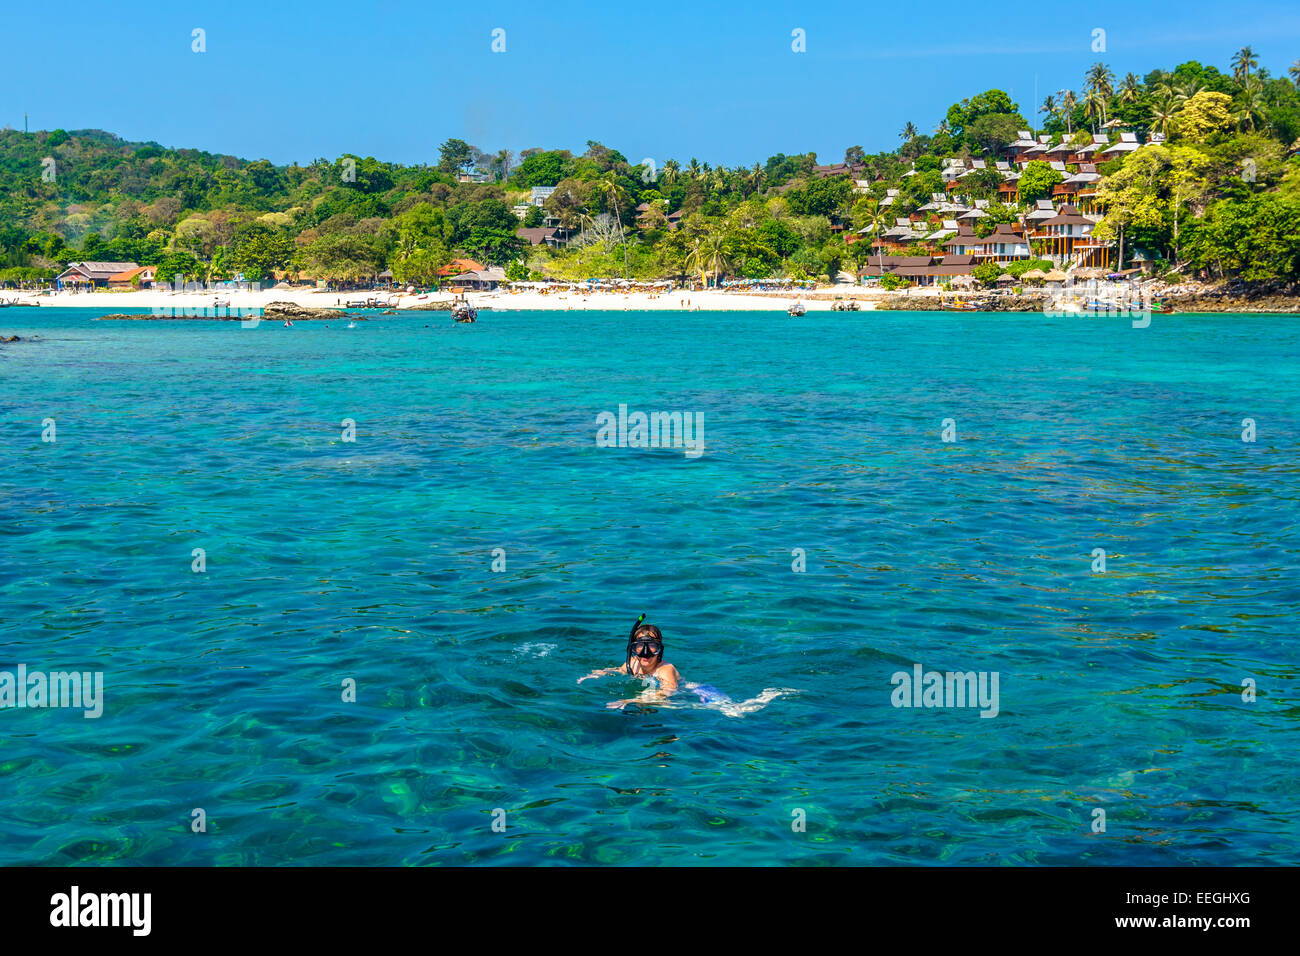 Tourist in the Adaman sea , Thailand snorkeling in exceptionaly clear water with underwater colourful coral and exotic fish Stock Photo